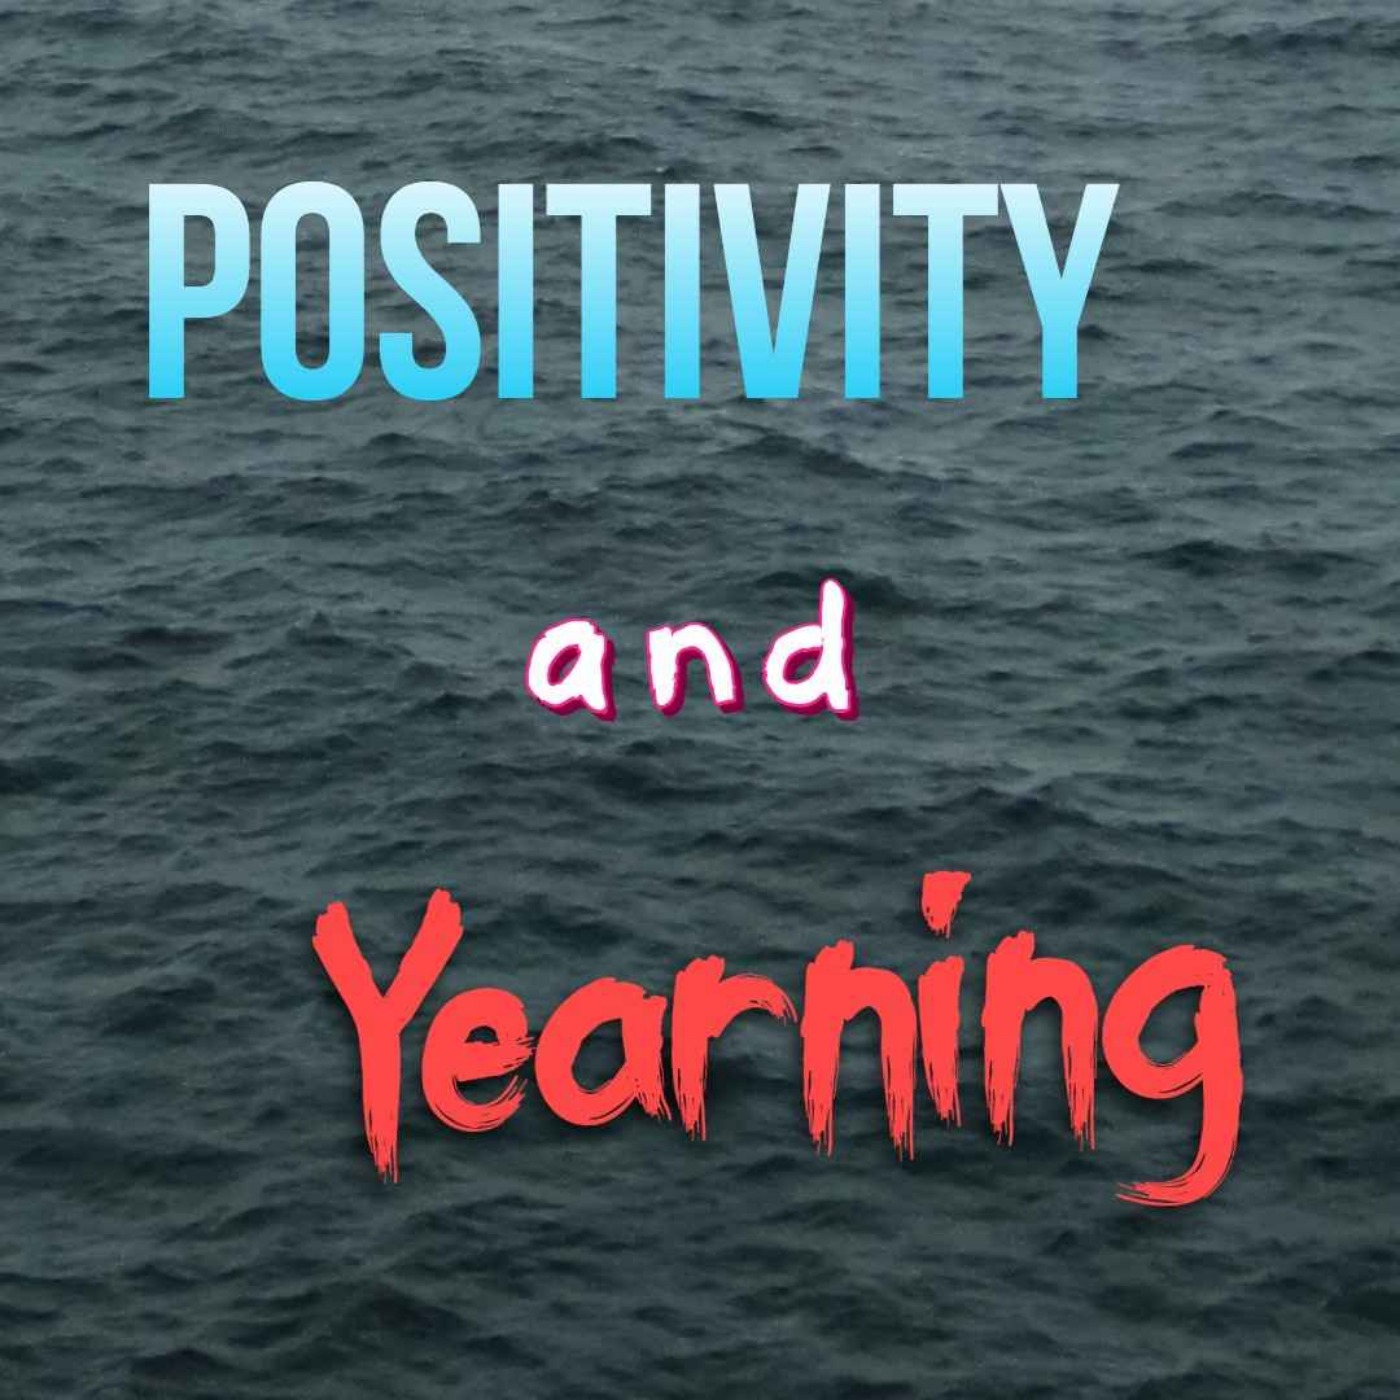 Positivity and Yearning